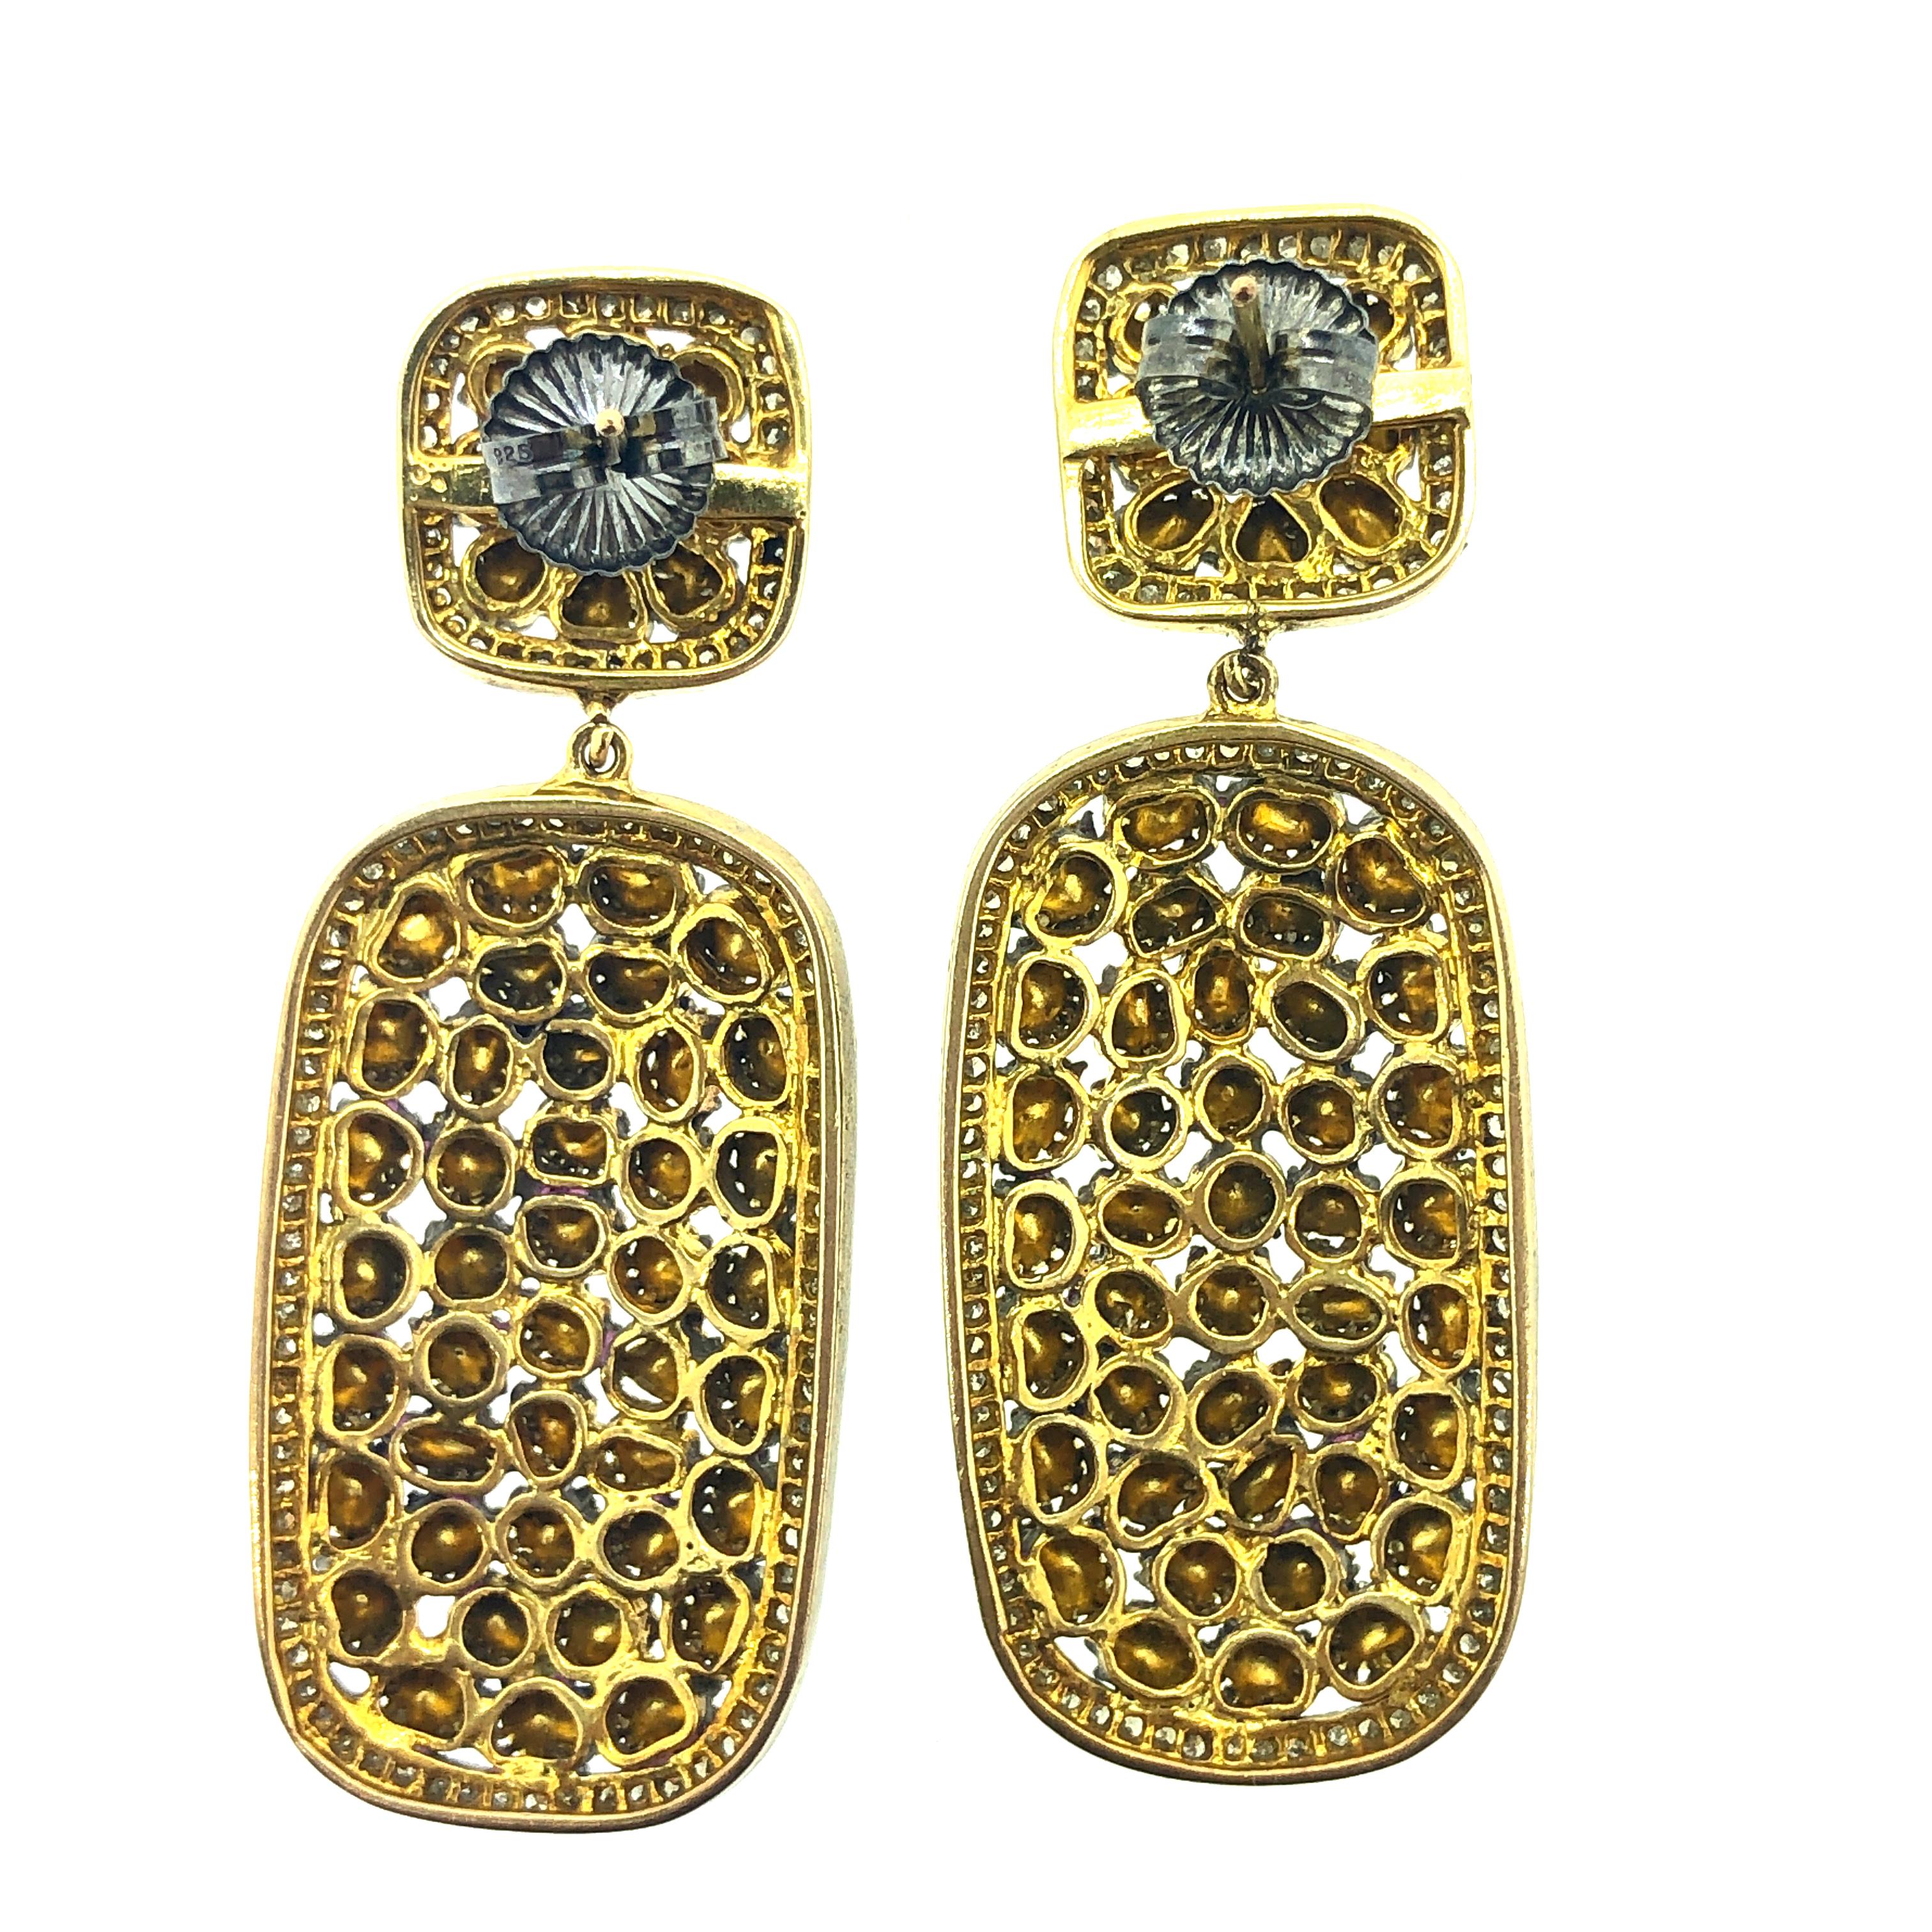 Contemporary 10 ct Old Mine Cut 'Polki' Diamond Earring in Oxidized Sterling Silver, 14K Gold